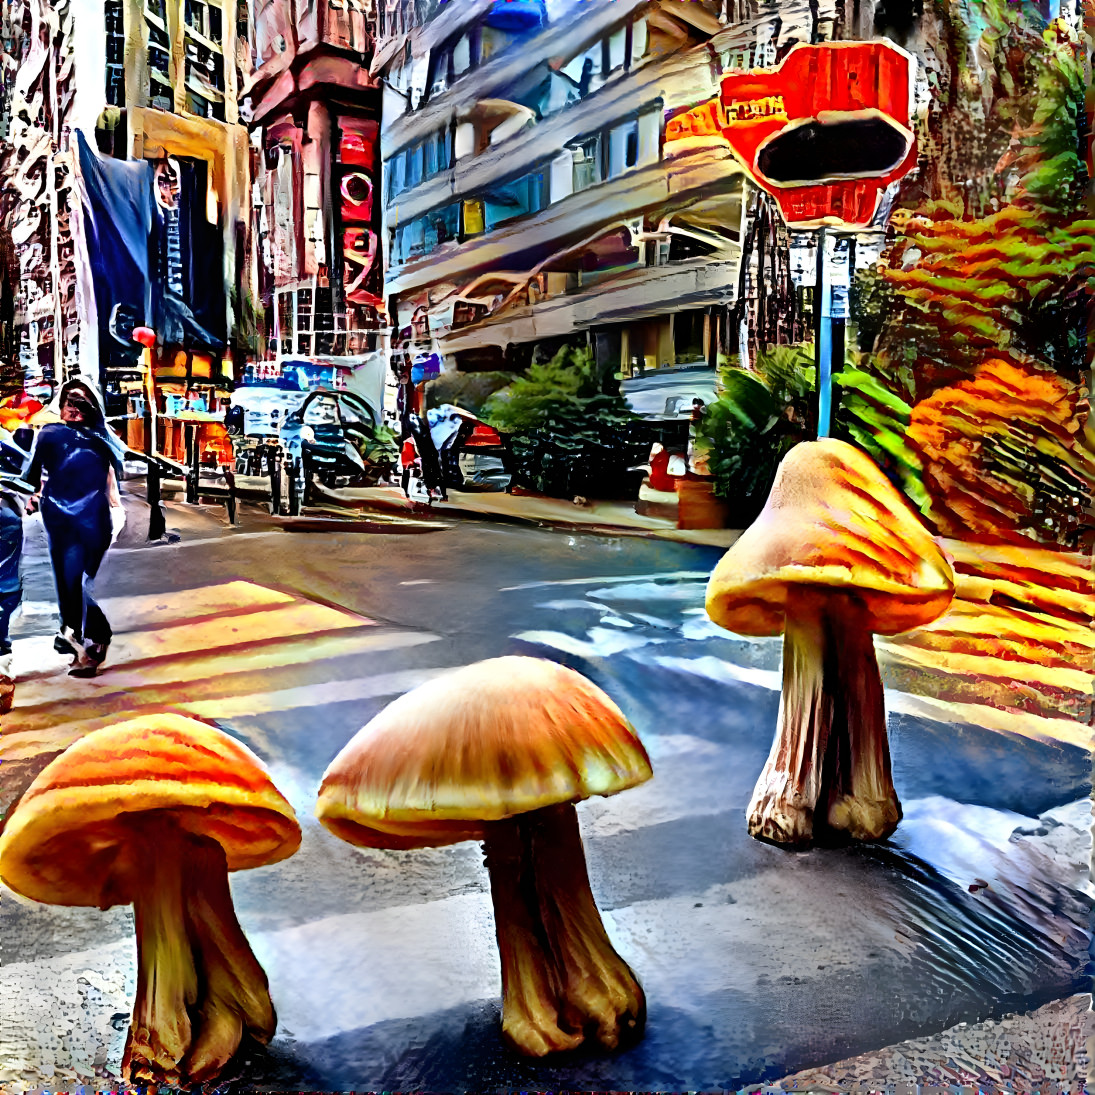 at first, the mushrooms seemed wondrous